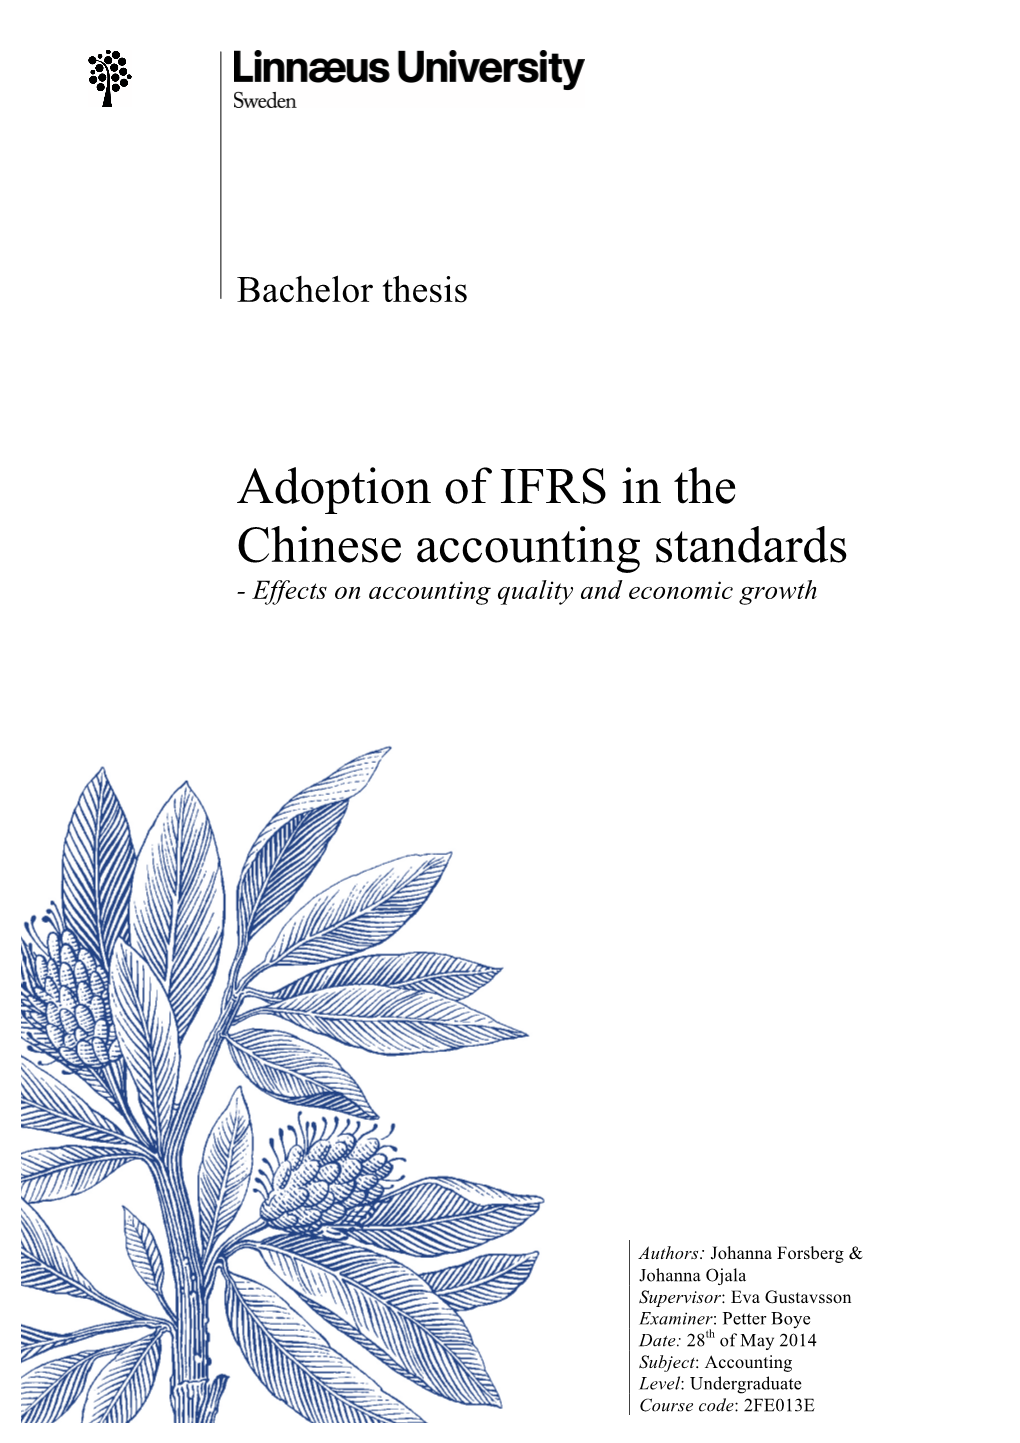 Adoption of IFRS in the Chinese Accounting Standards - Effects on Accounting Quality and Economic Growth